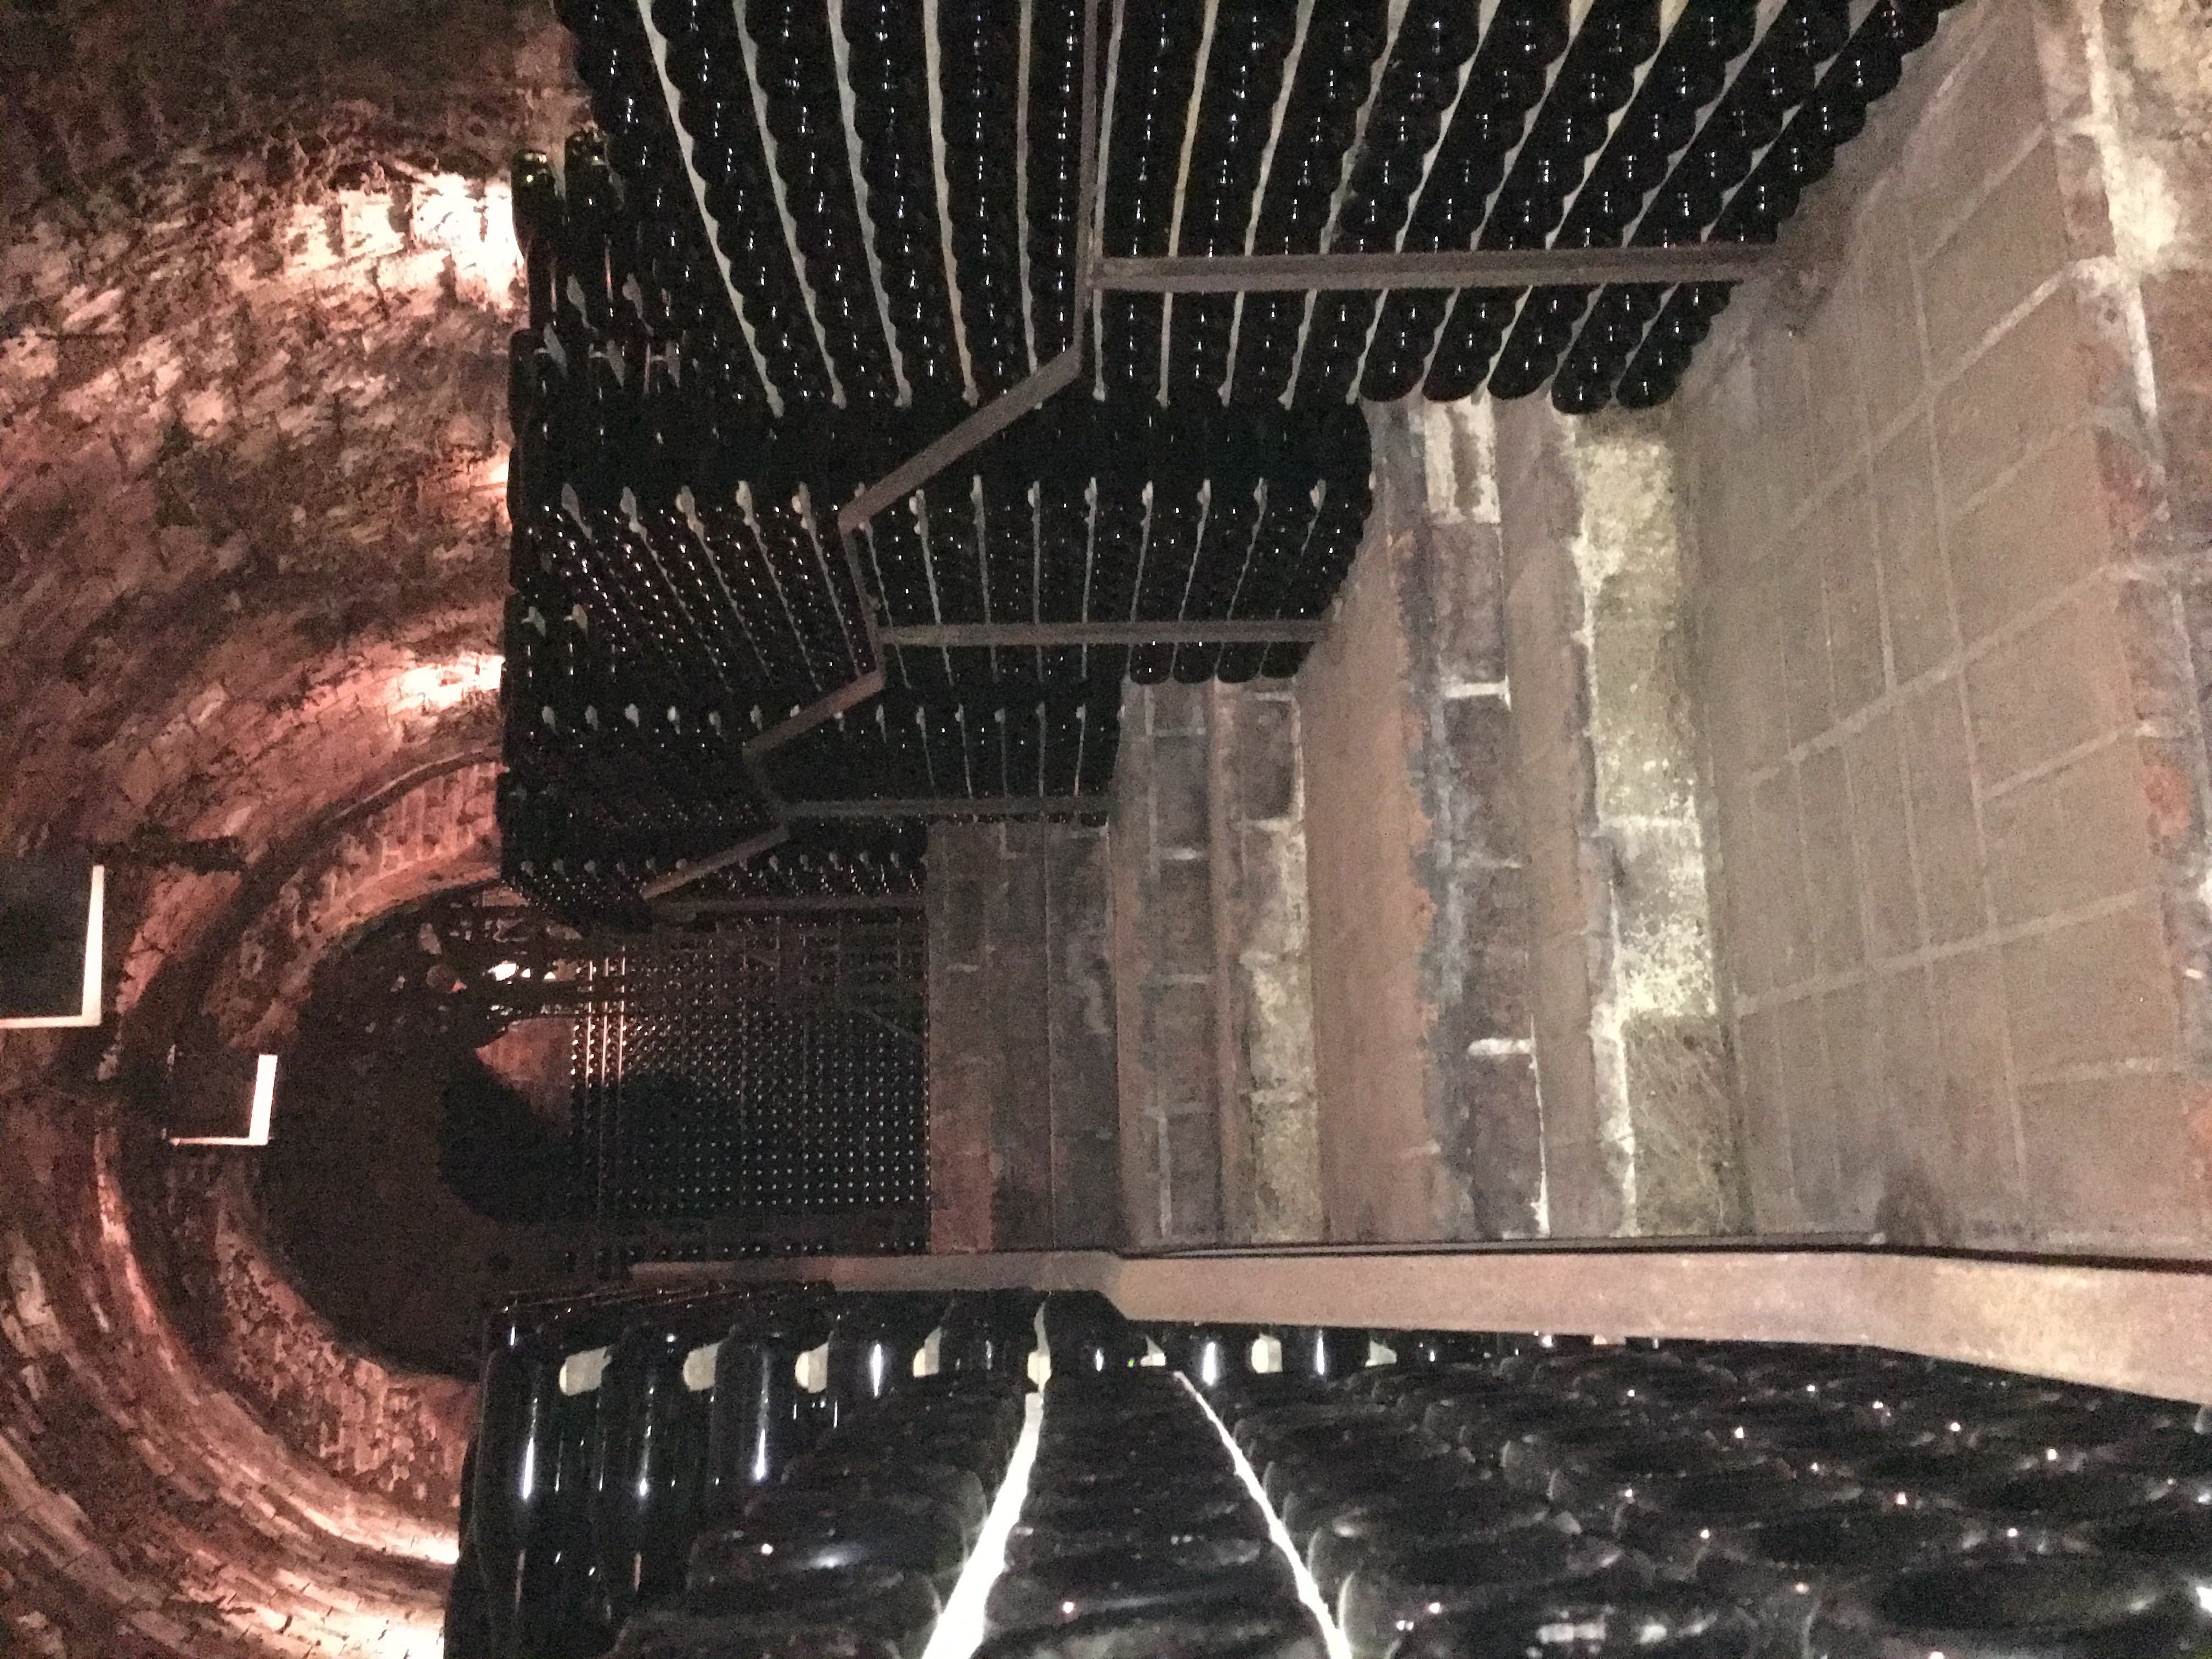 stairs down into a cellar lined with cava bottles